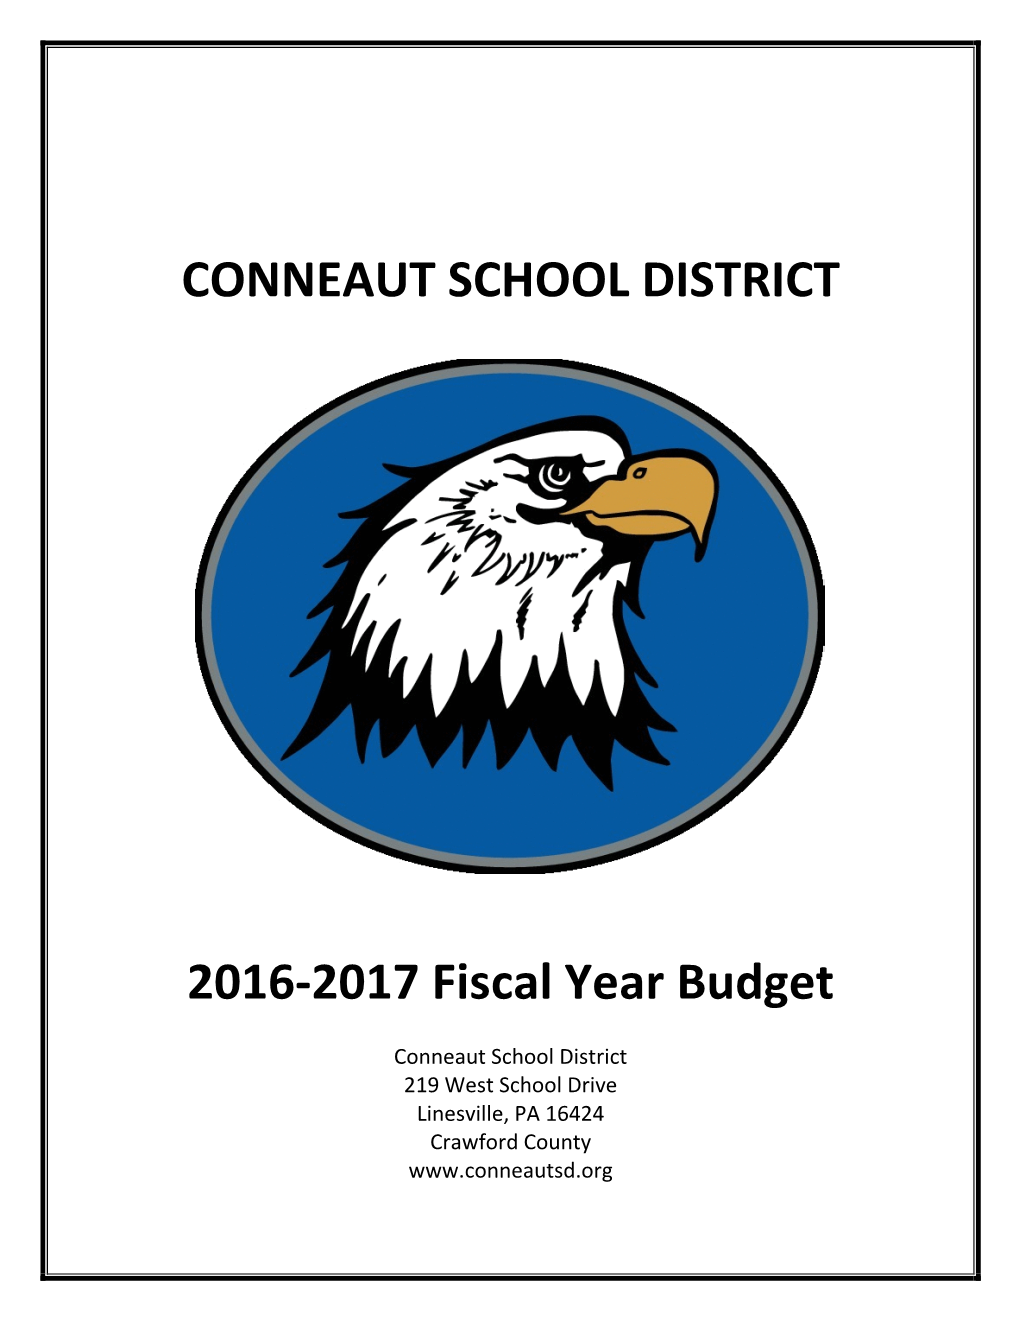 CONNEAUT SCHOOL DISTRICT 2016-2017 Fiscal Year Budget